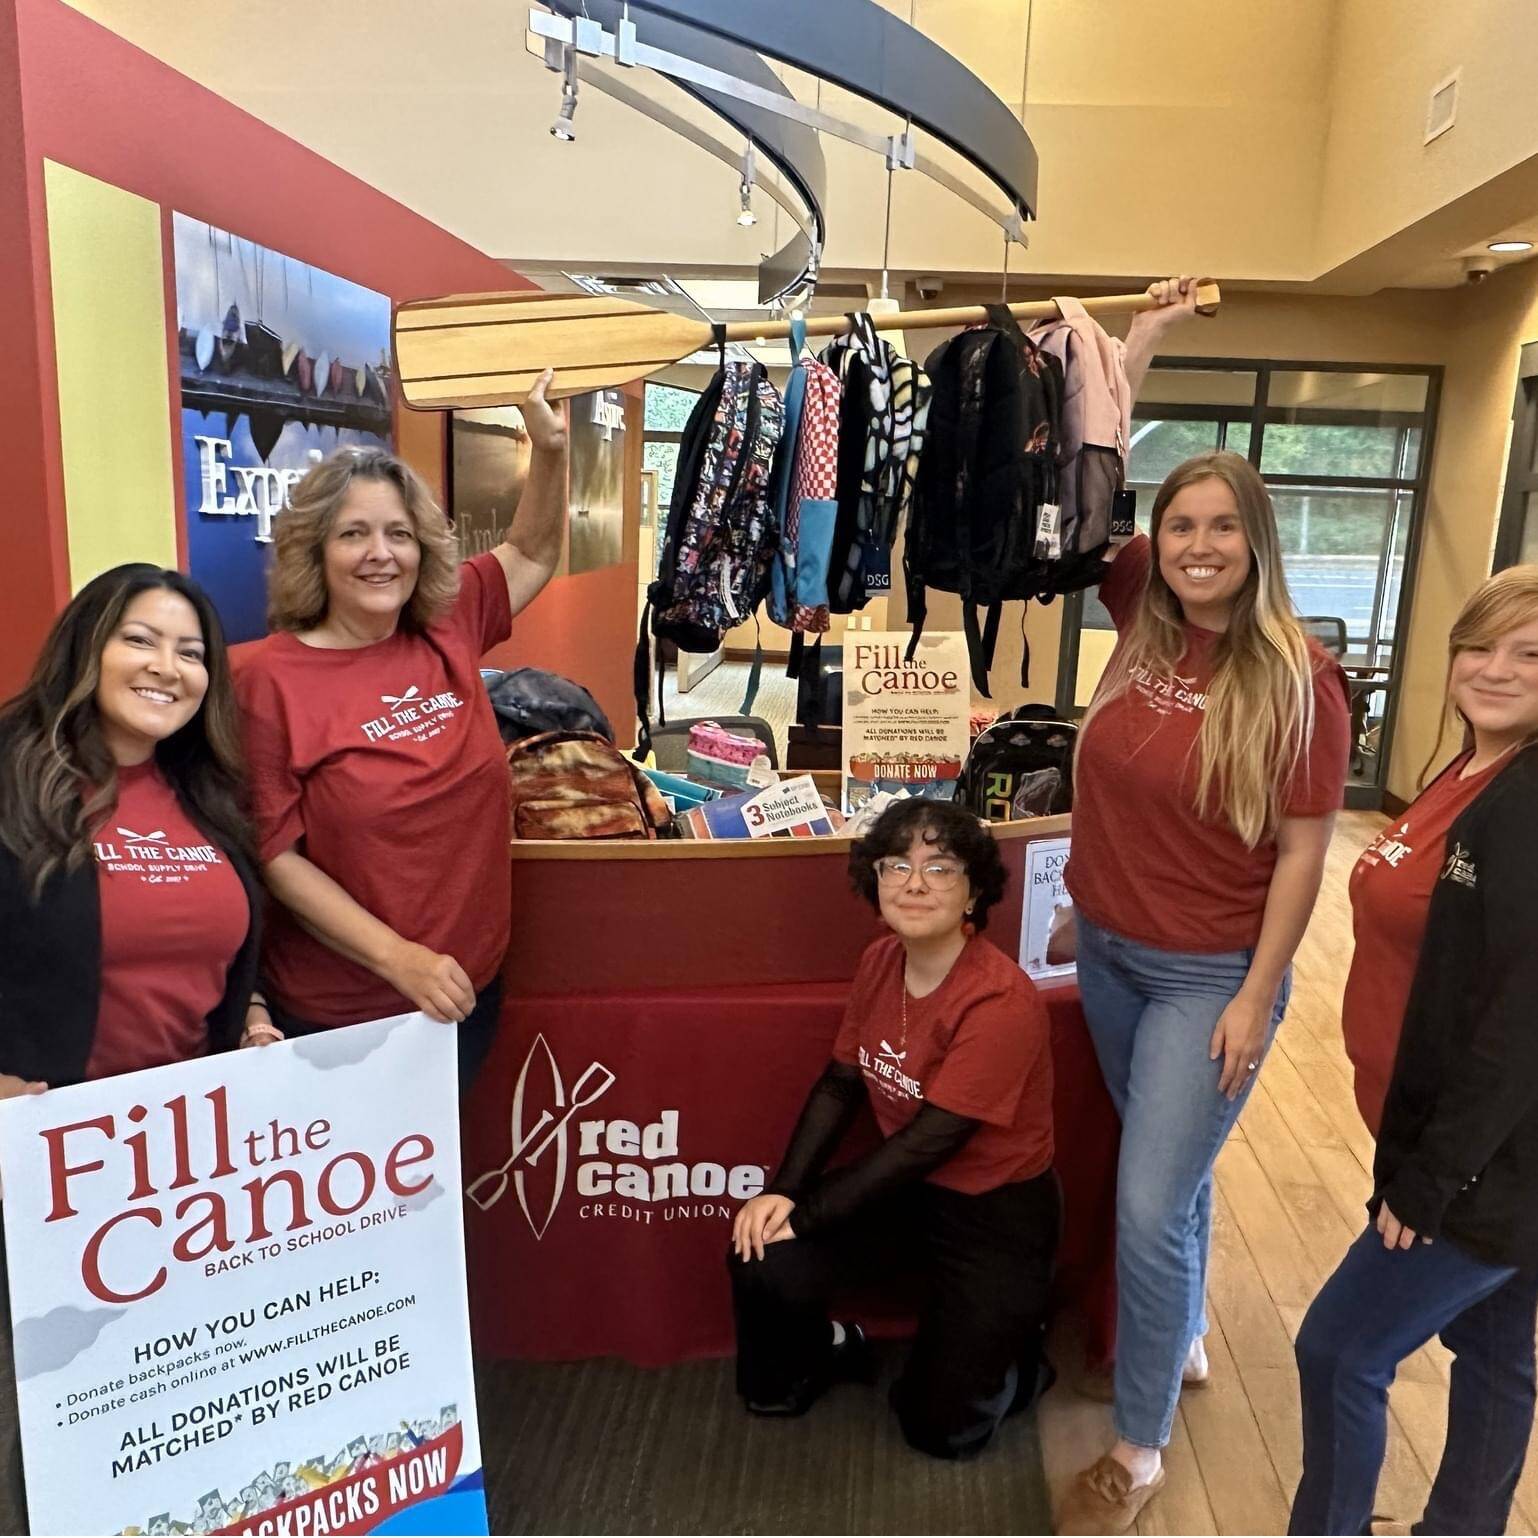 Photo provided by Red Canoe
Federal Way staff of Red Canoe showing their backpack donation to our drive. Employees overall make up one of the largest group of donors.